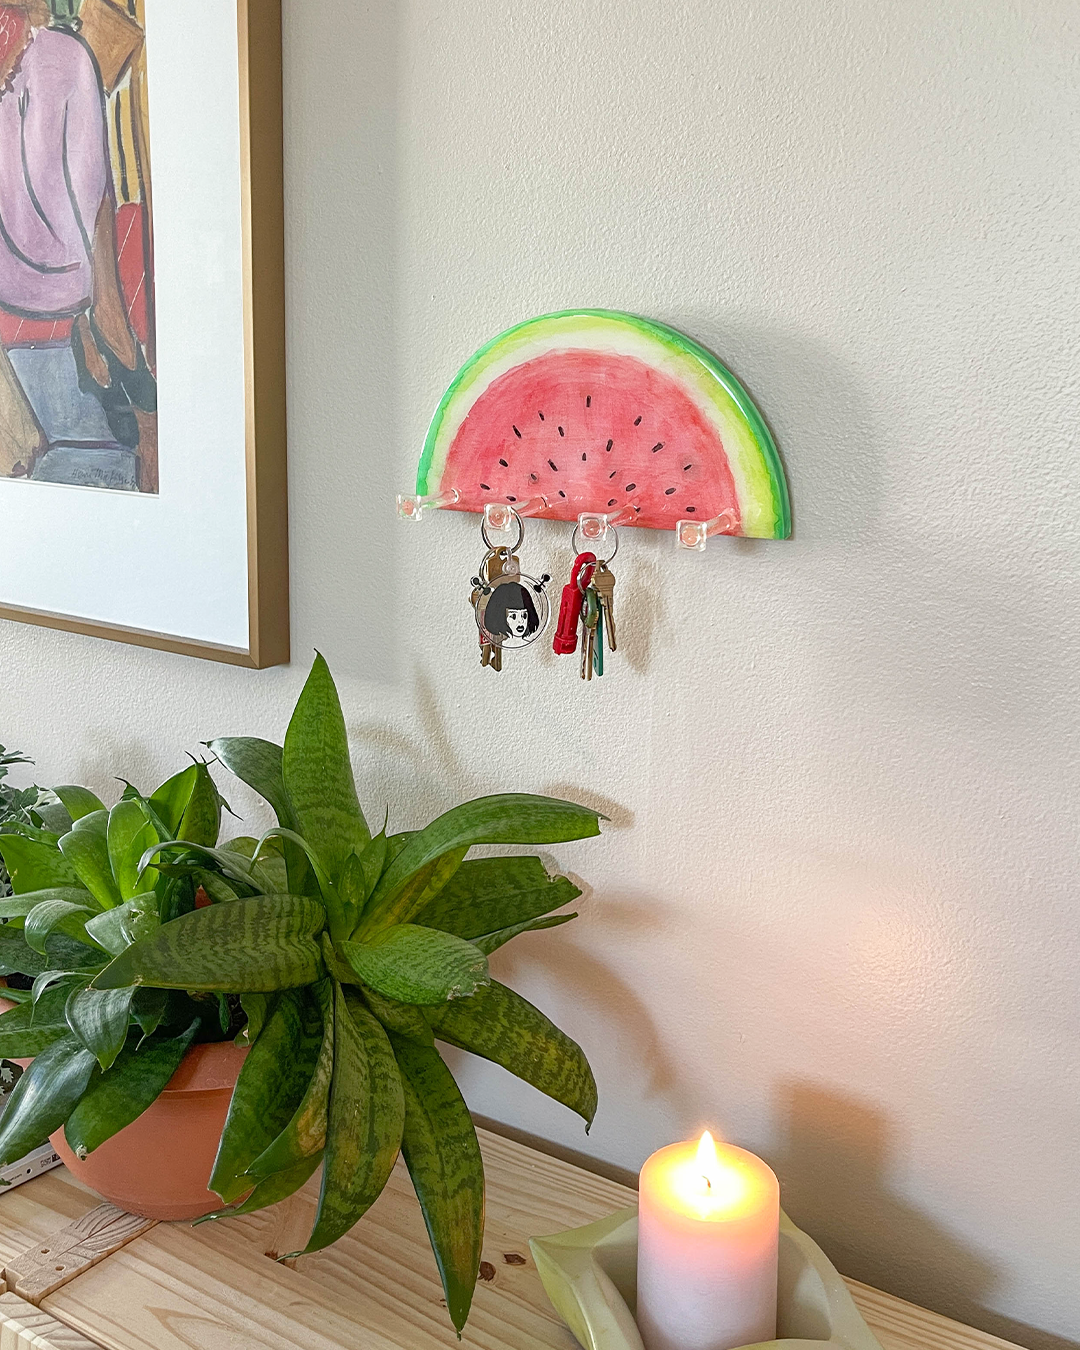 Unique hand-painted key holder inspired by a watermelon slice, adding a summery touch to any wall.